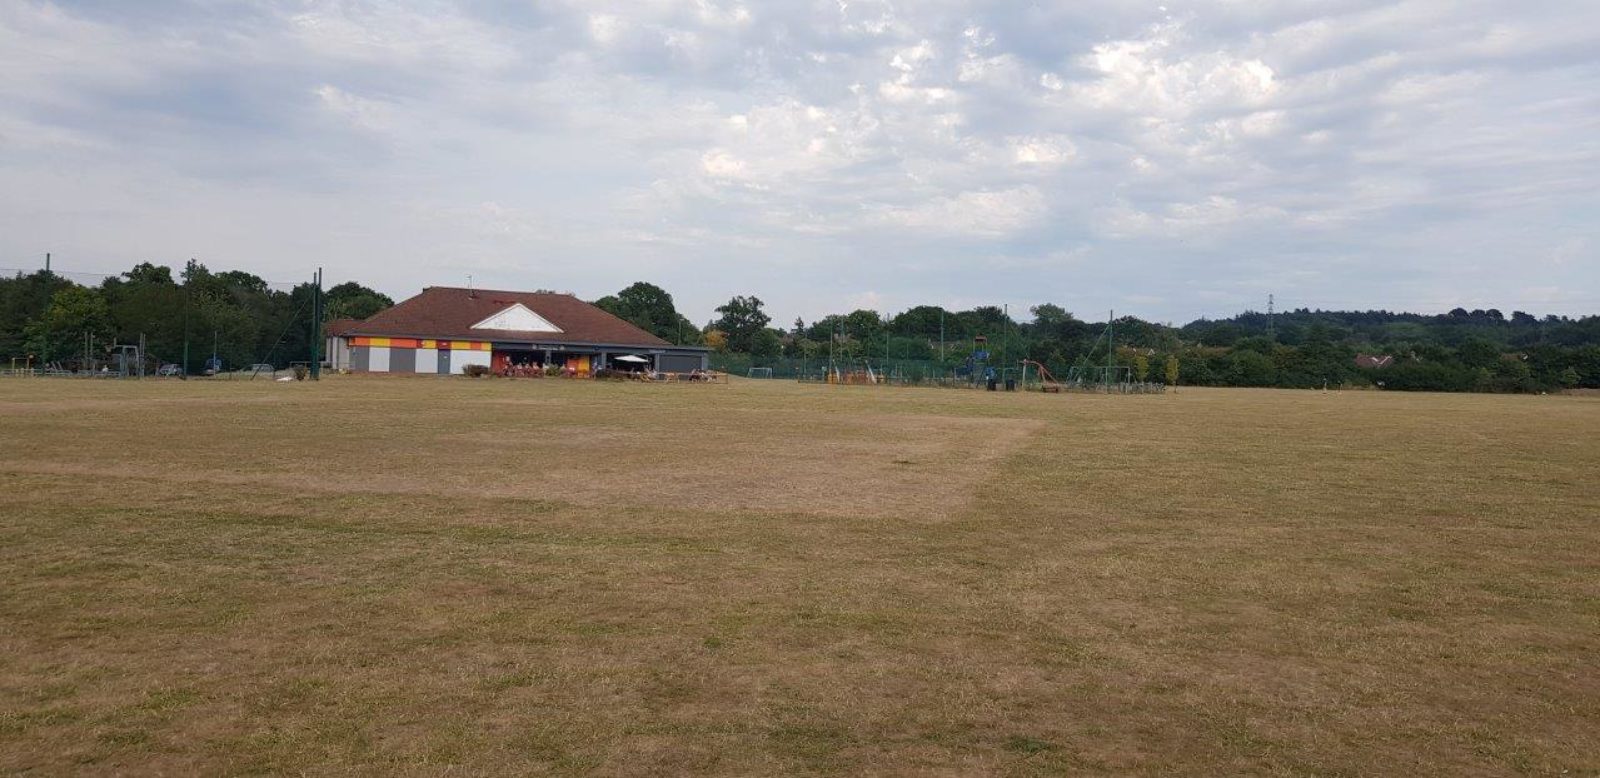 Maidenbower playing field